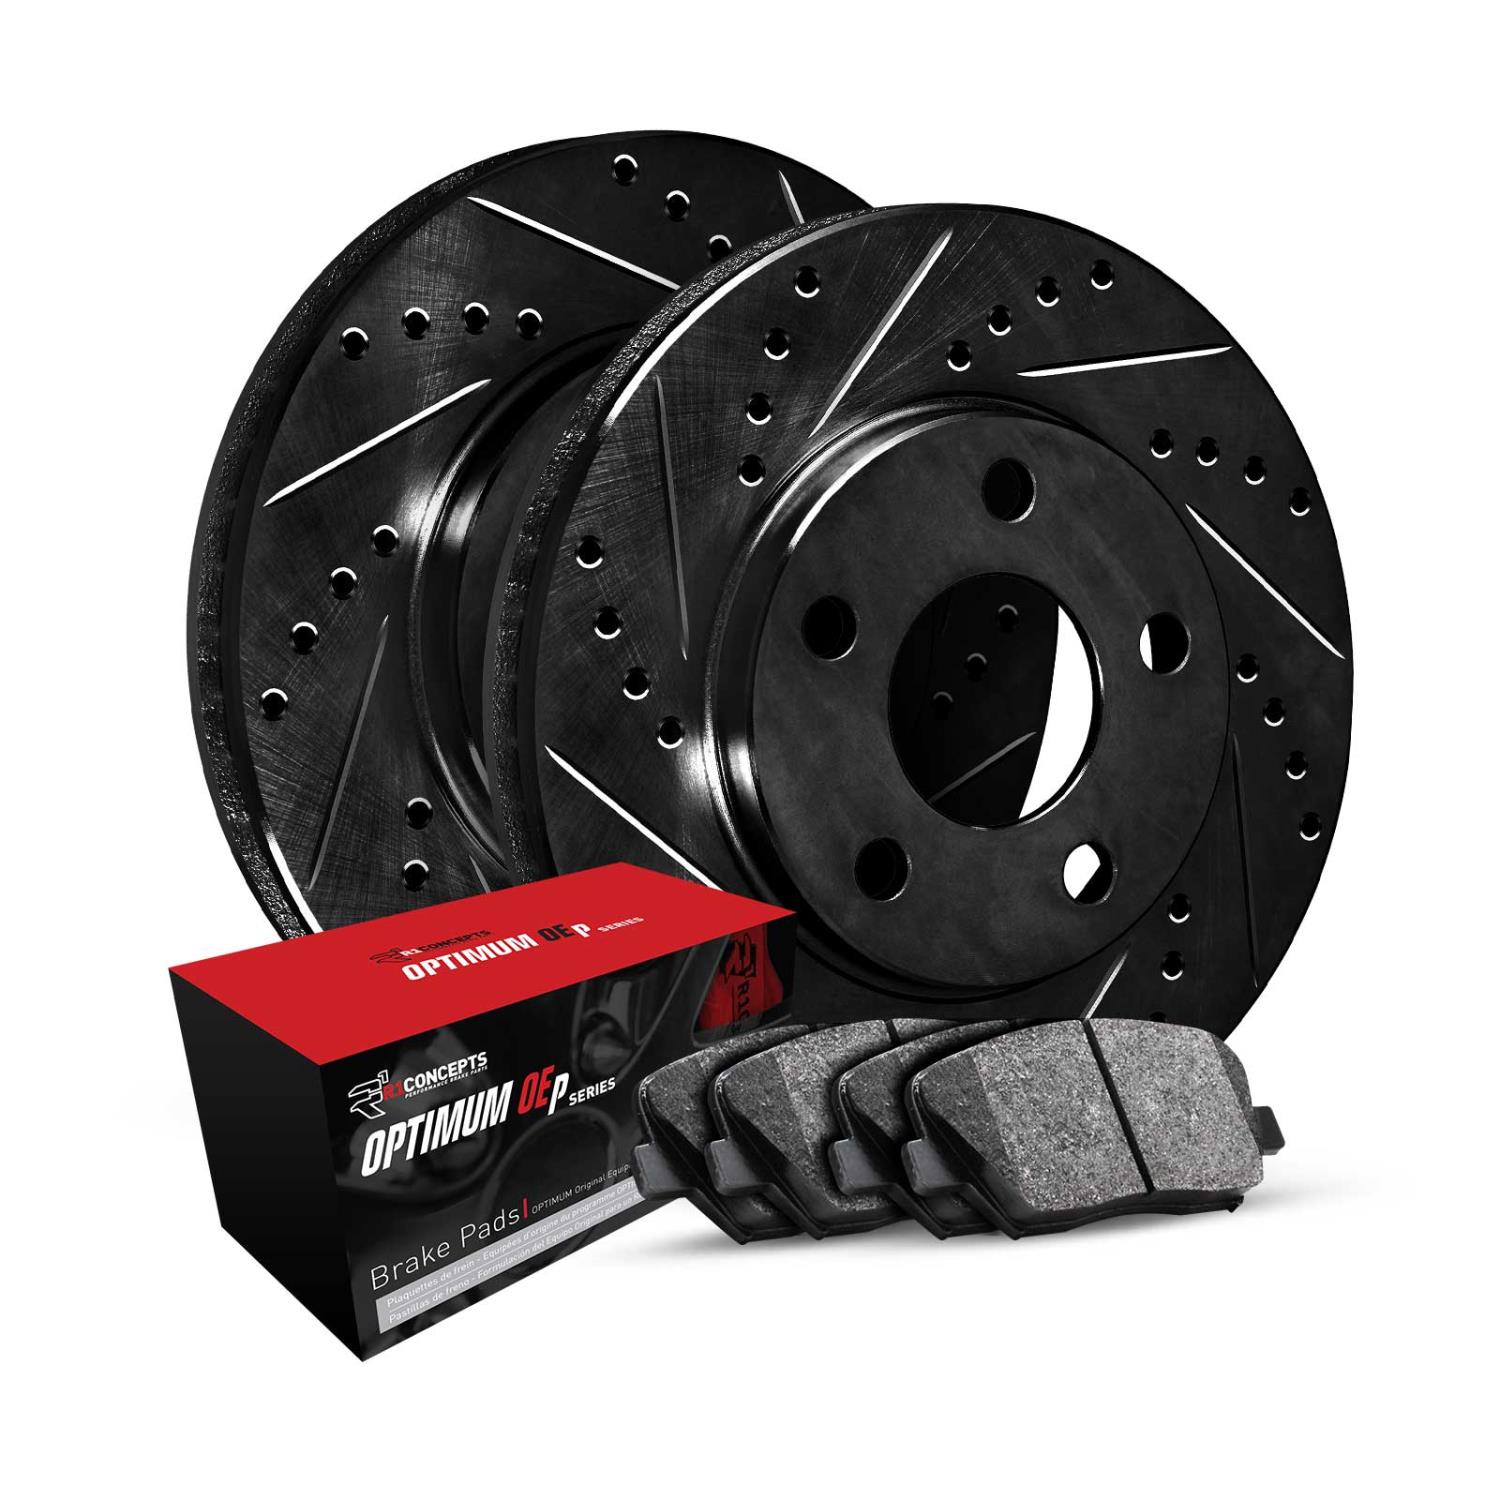 E-Line Drilled & Slotted Black Brake Rotor Set w/Optimum OE Pads, Fits Select Mitsubishi, Position: Rear